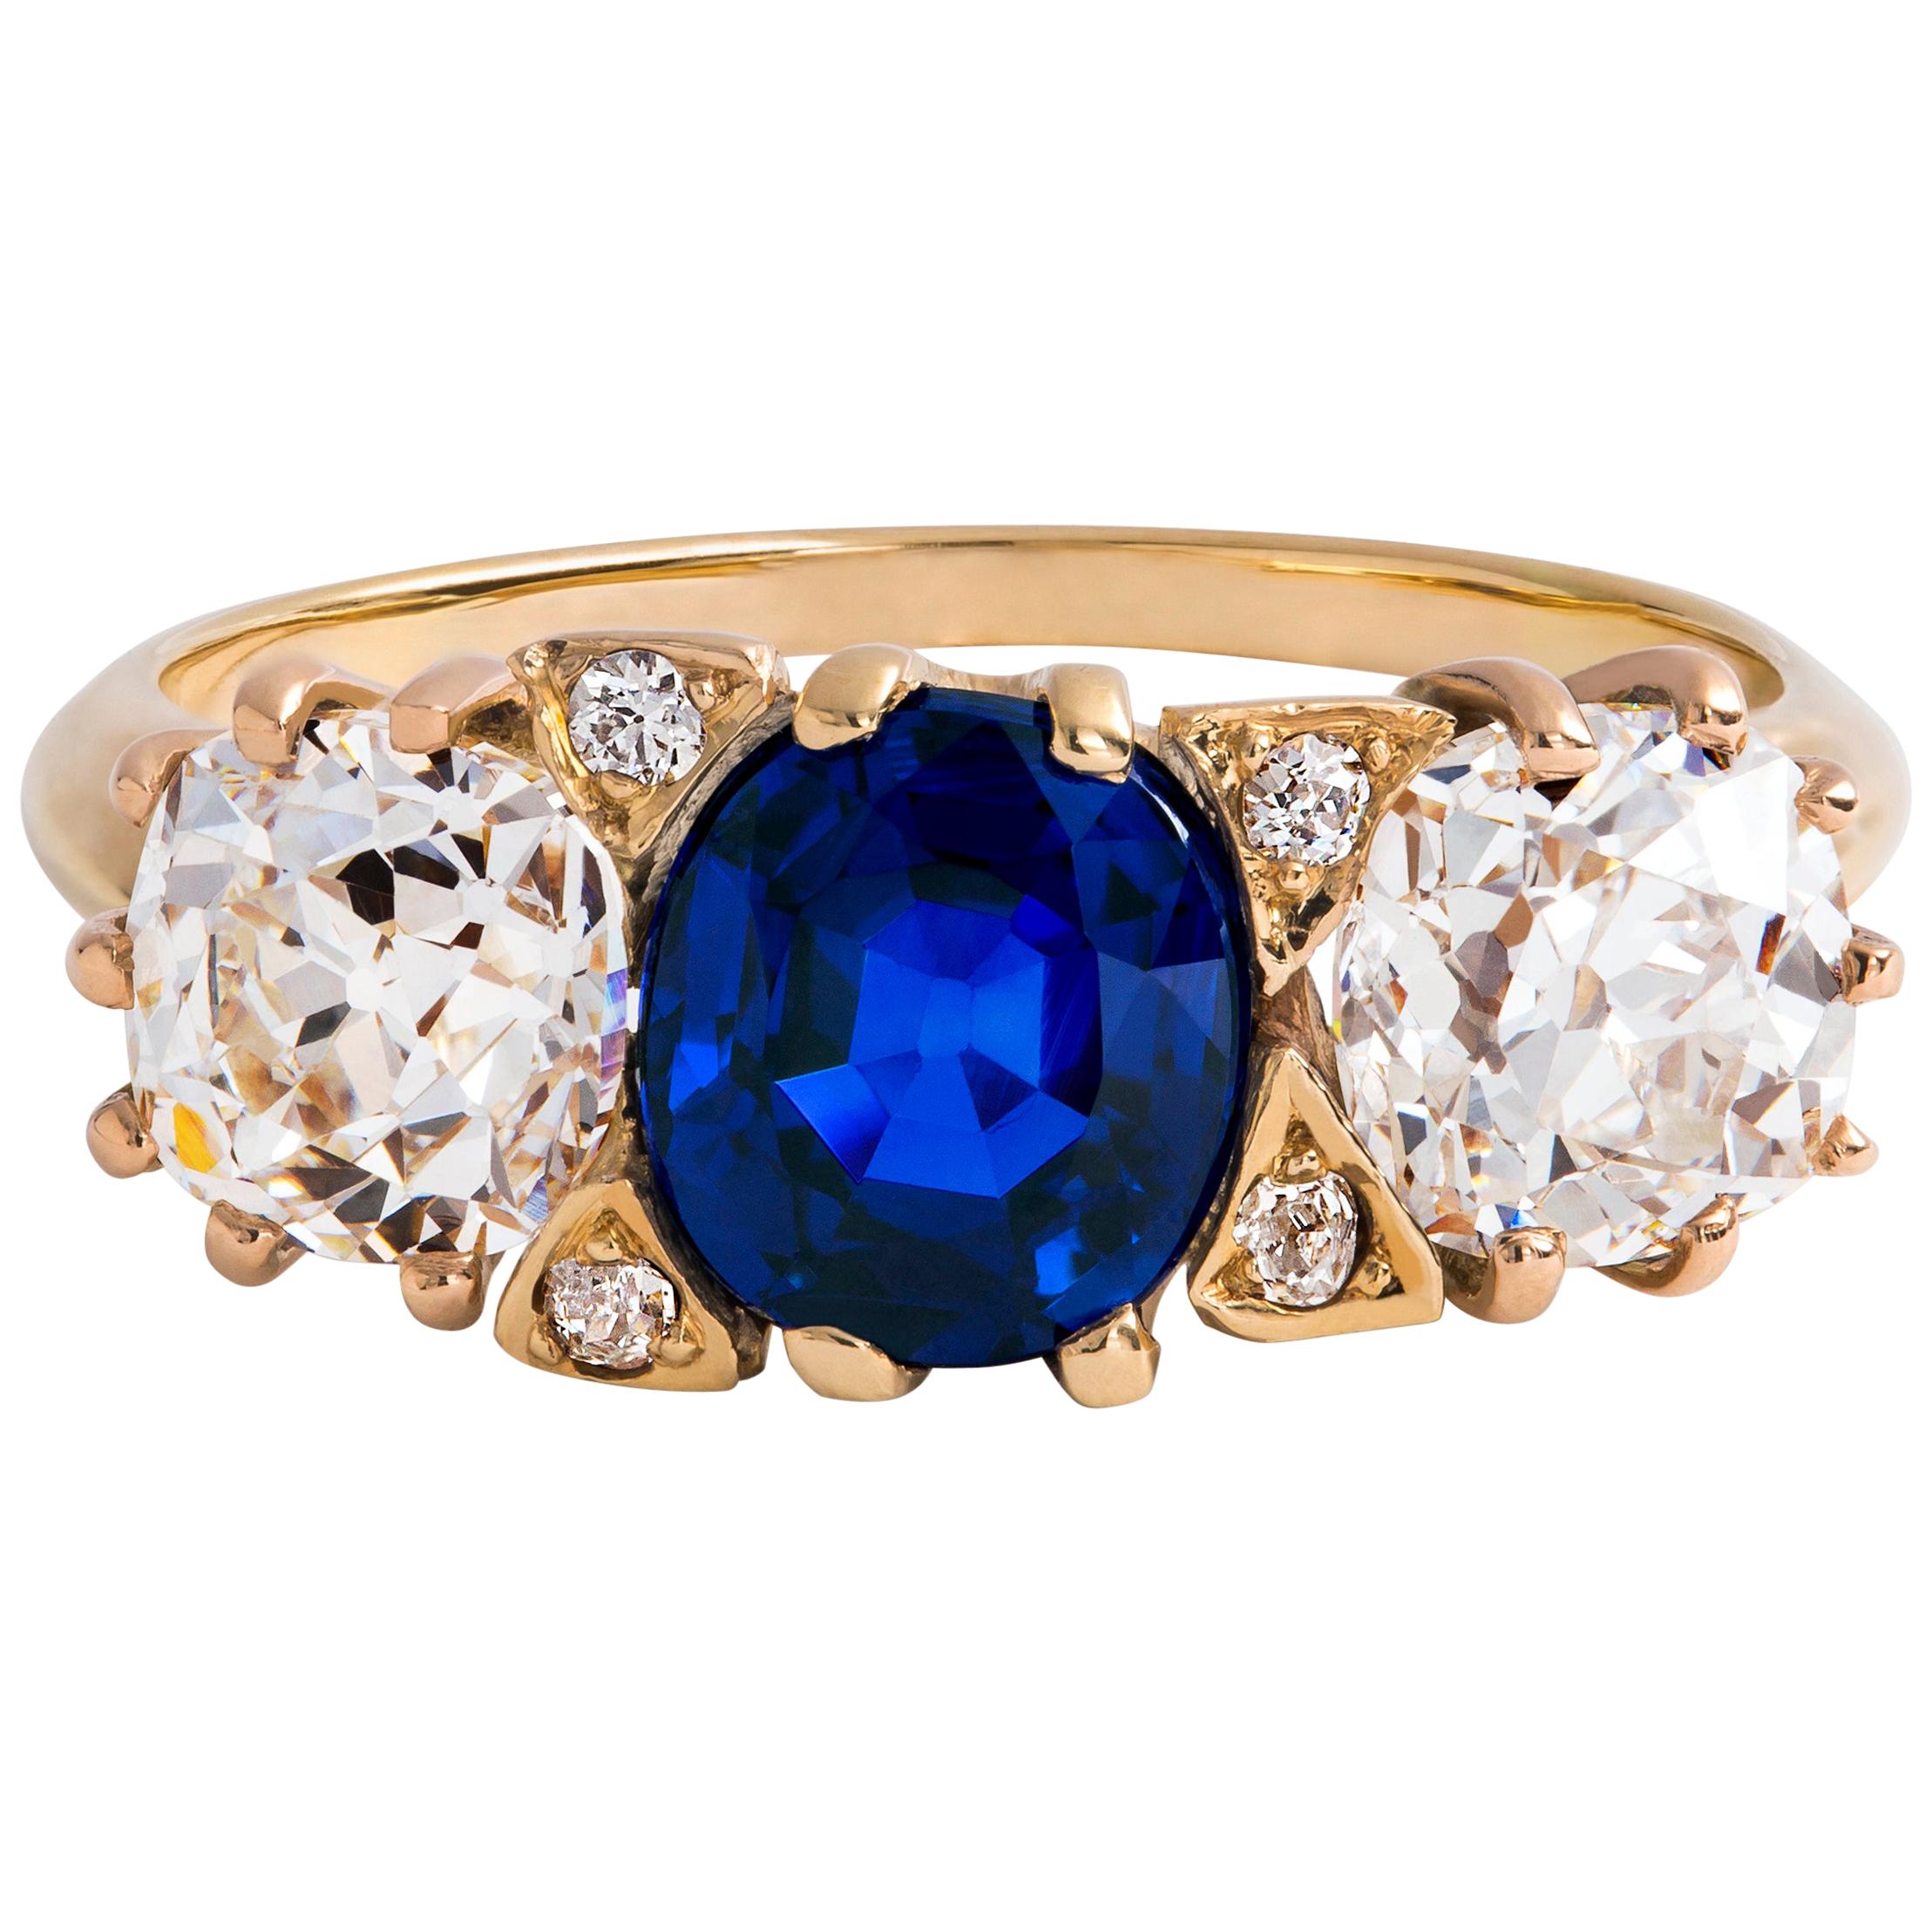 Antique J.E. Caldwell & Co. Sapphire and Diamond 3-Stone Ring in 14 Karat Gold